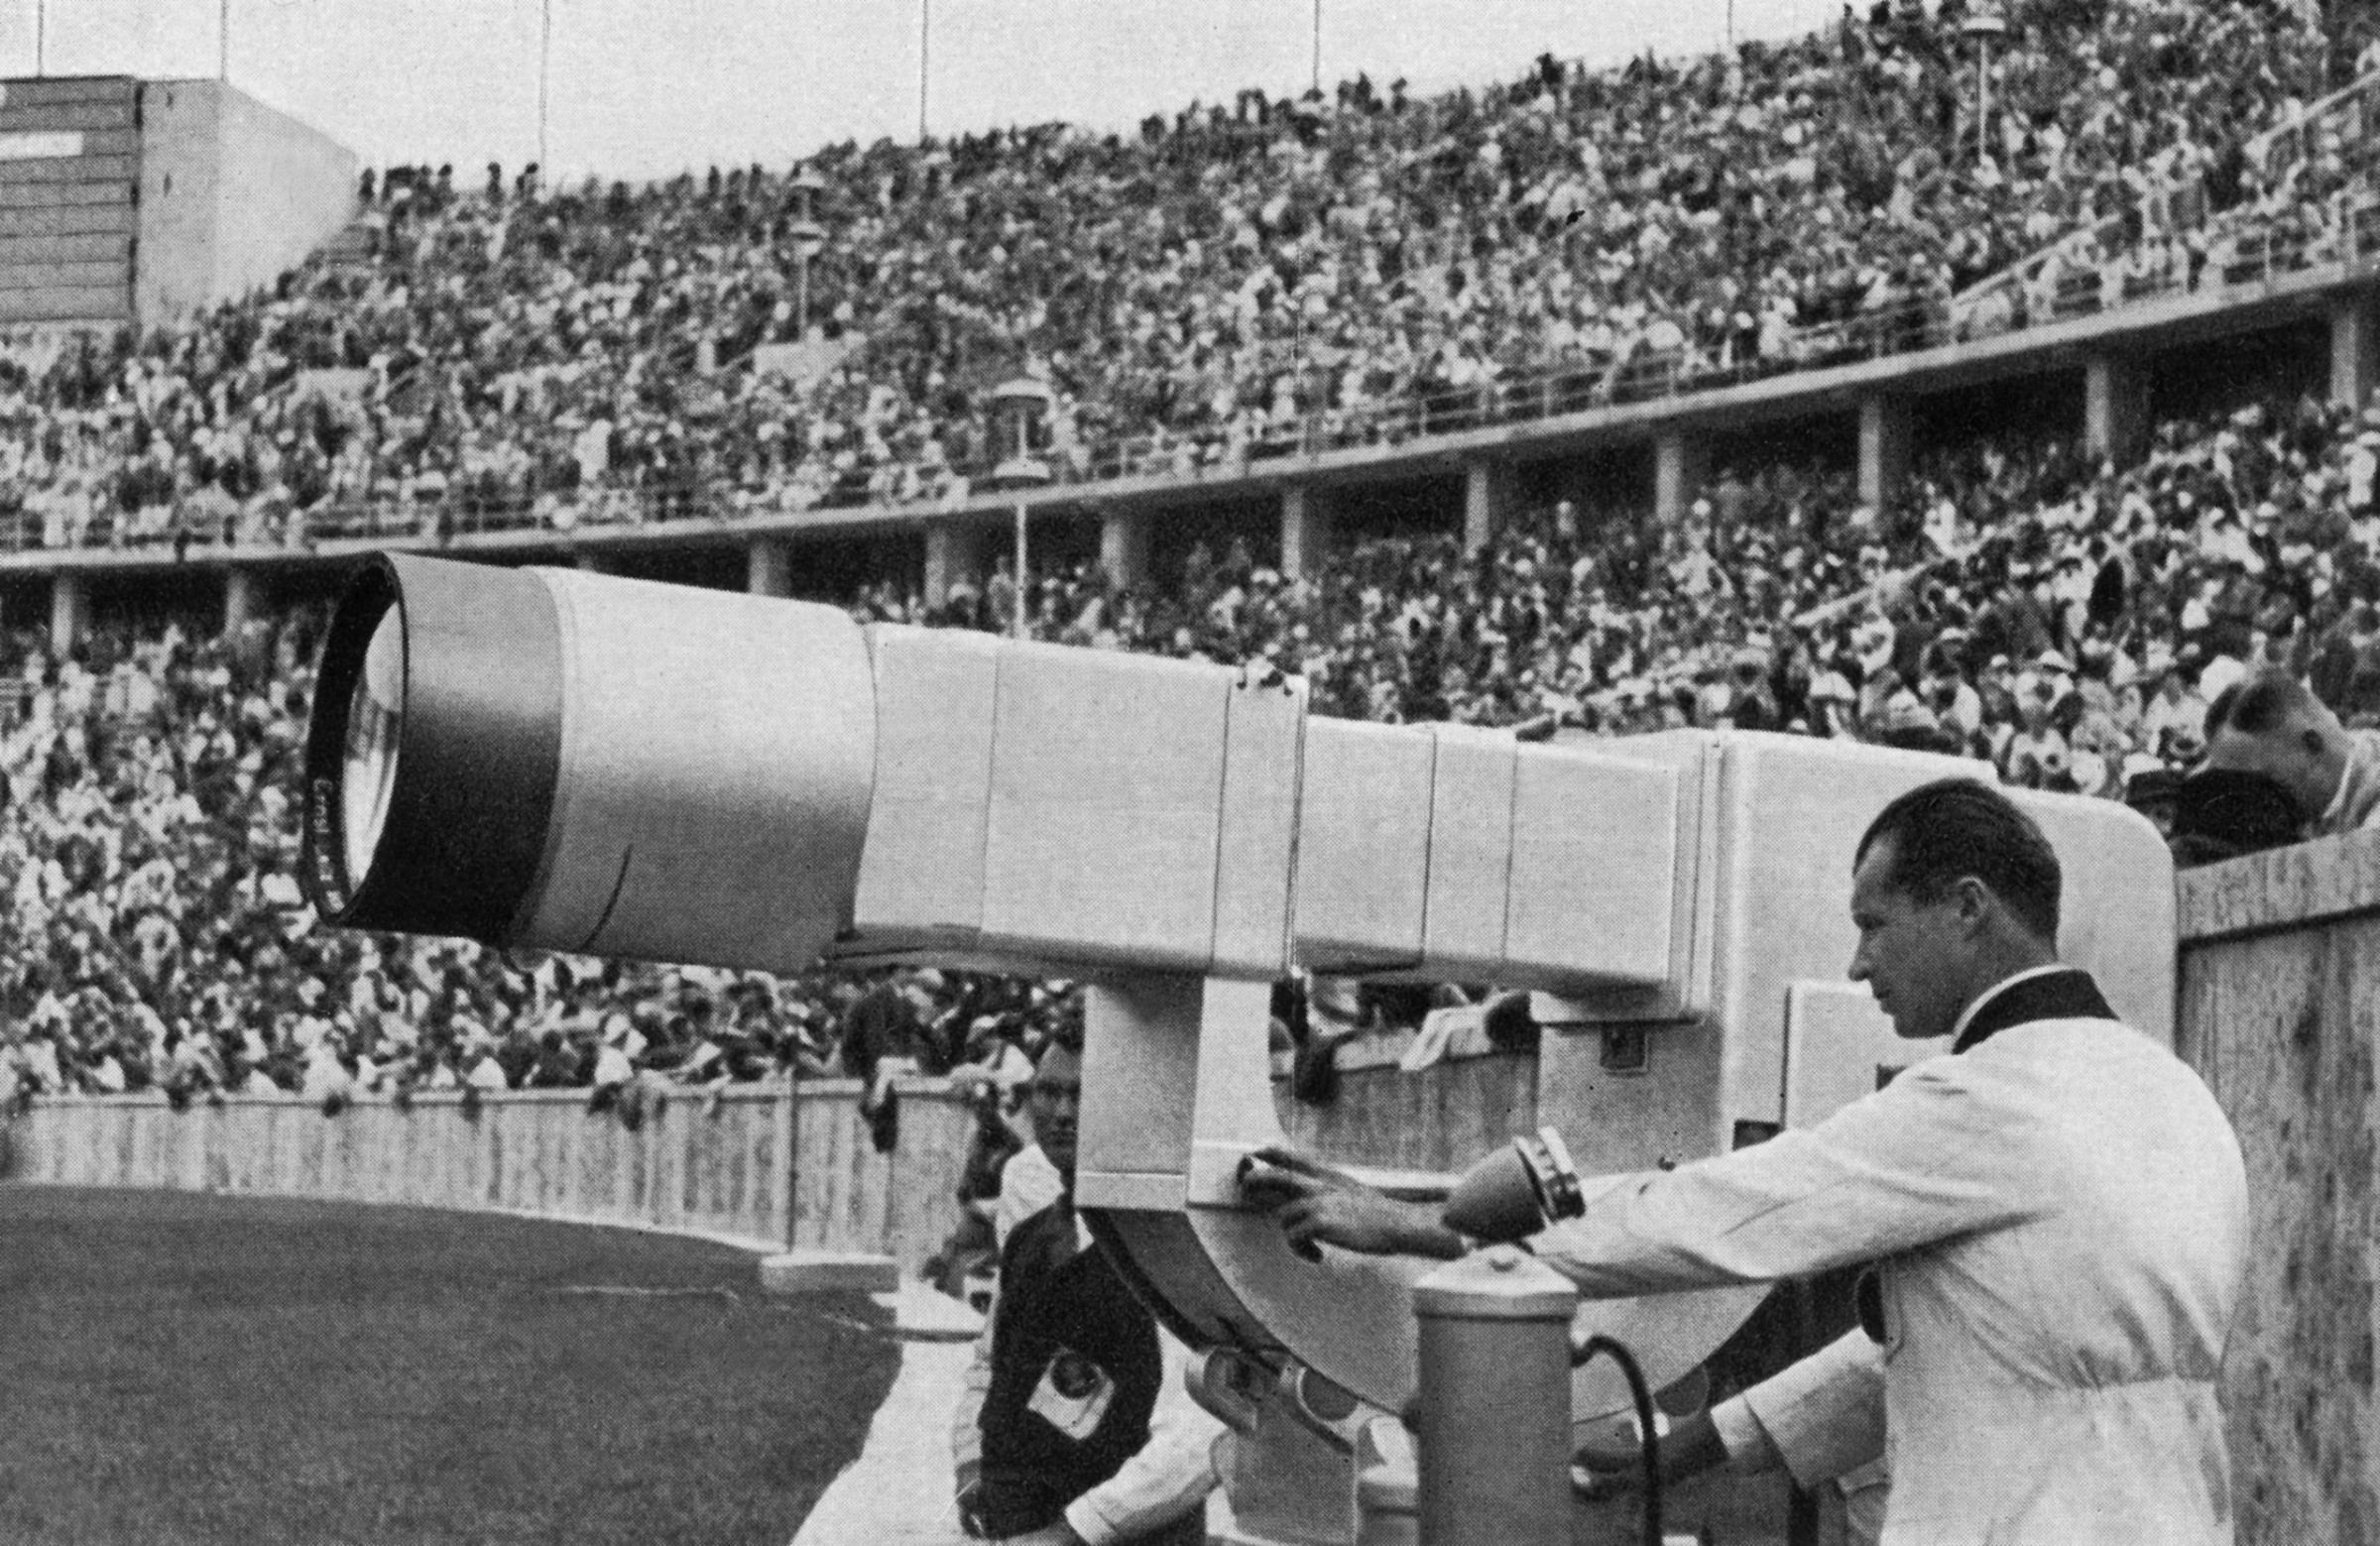 A German technician checks the Television canon put in the Olympic Stadium, 01 August 1936, a huge electronic camera buildt by Telefunken, which broadcast live for the first time, 8 hours each day, the Berlin Olympics Games show.